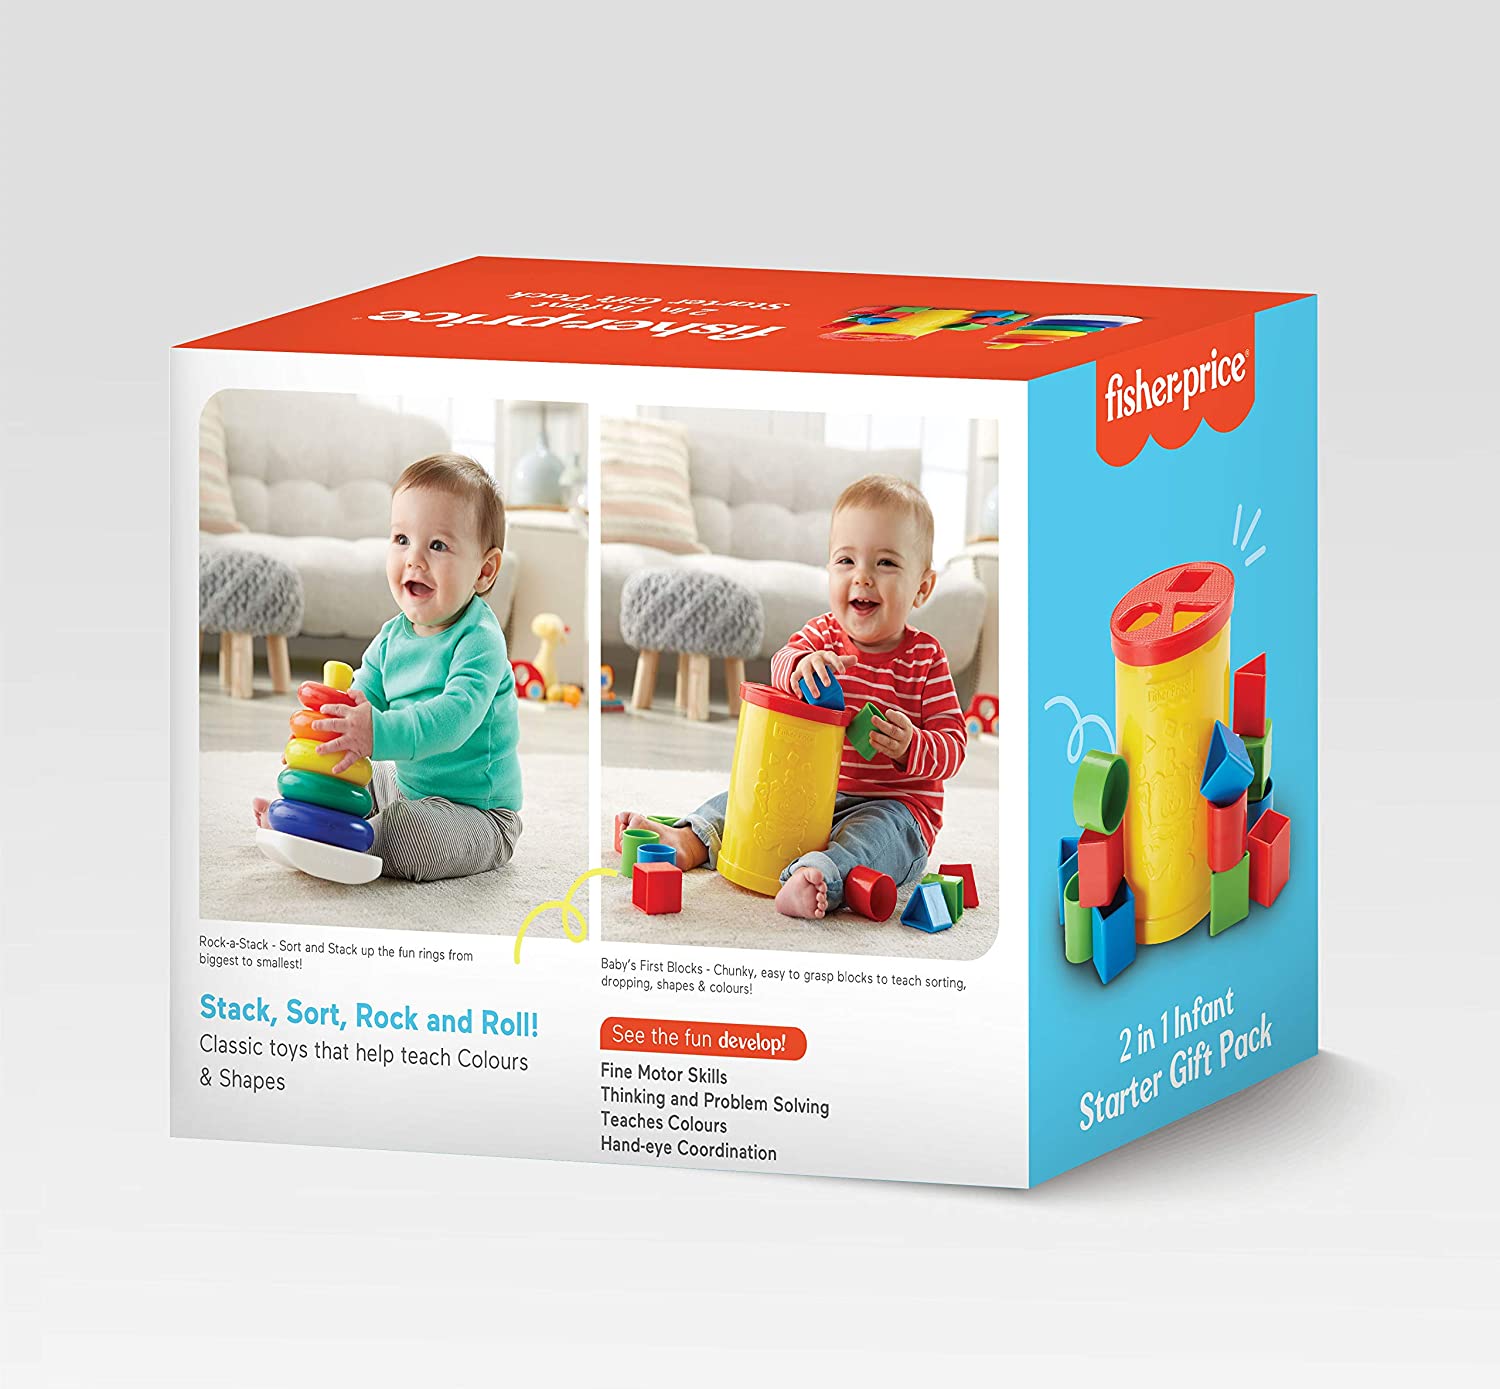 Buy Fisher-Price 2-in-1 Infant Starter Gift pack online at Best Price in India from kiddiewonderland.in. Explore Fast and free delivery across India with special discount offers. 